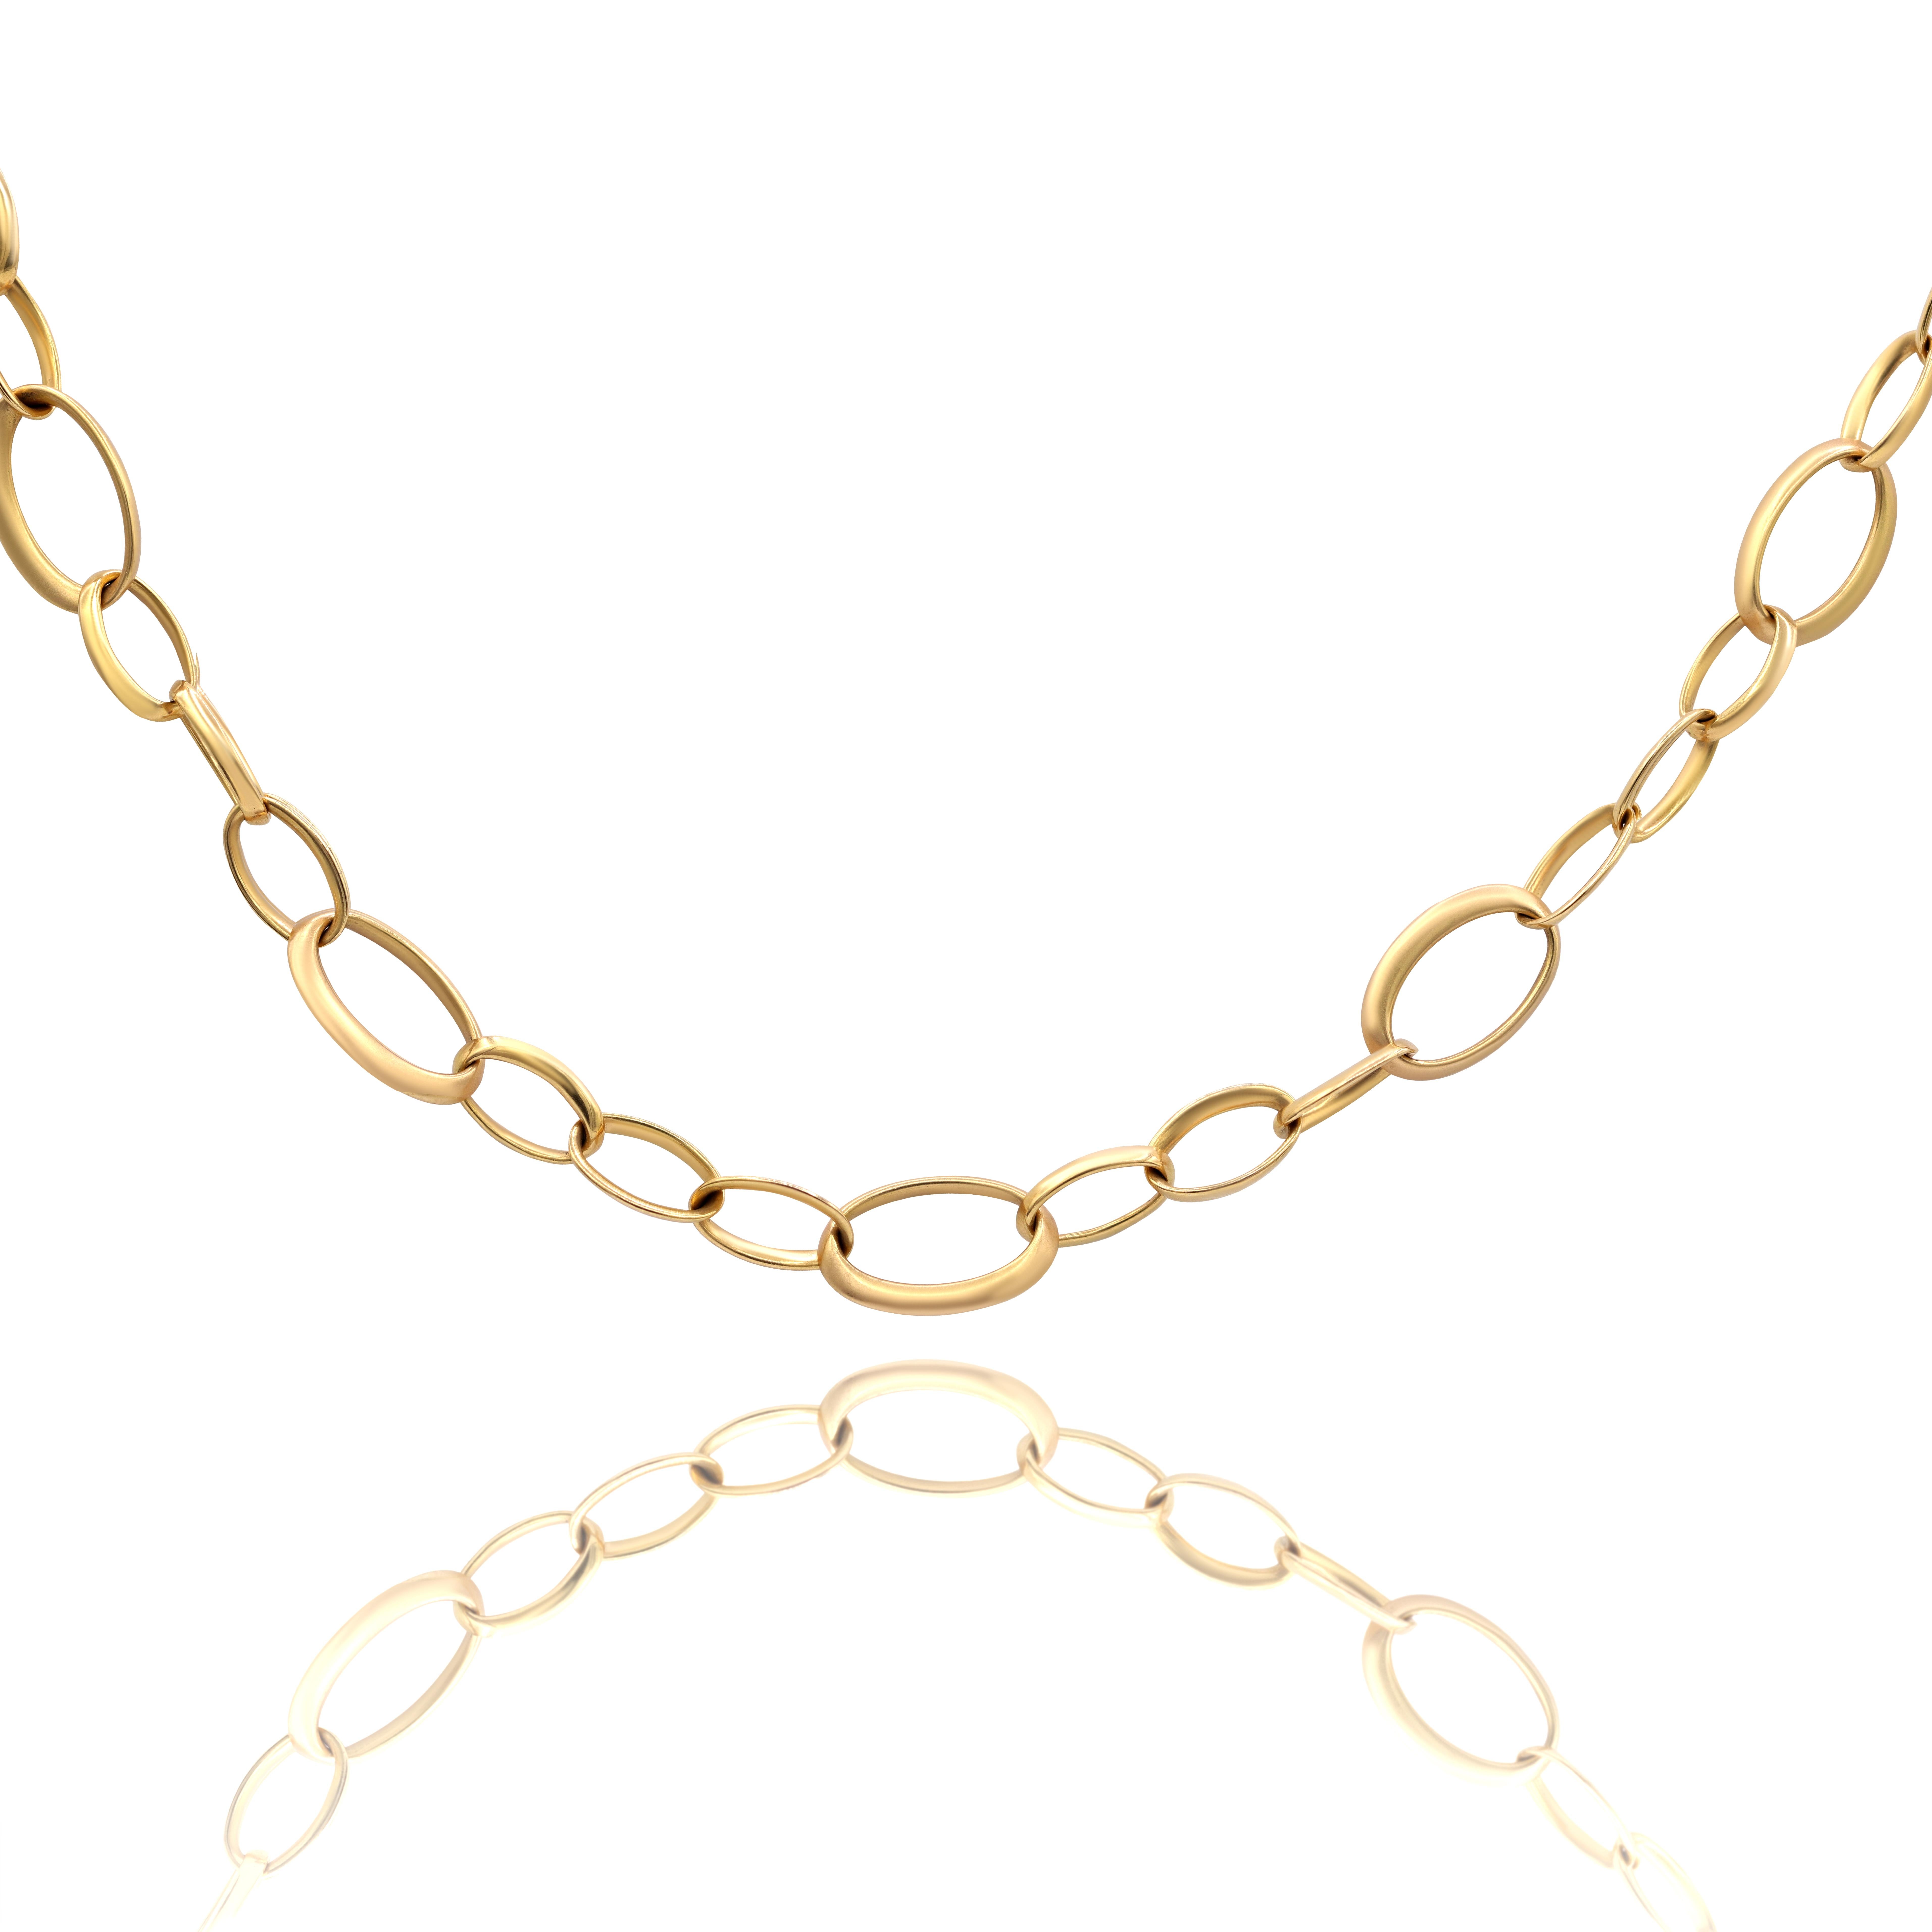 18KT Rose gold, long linked necklace.
Weight: 90 grams
Size category: 36